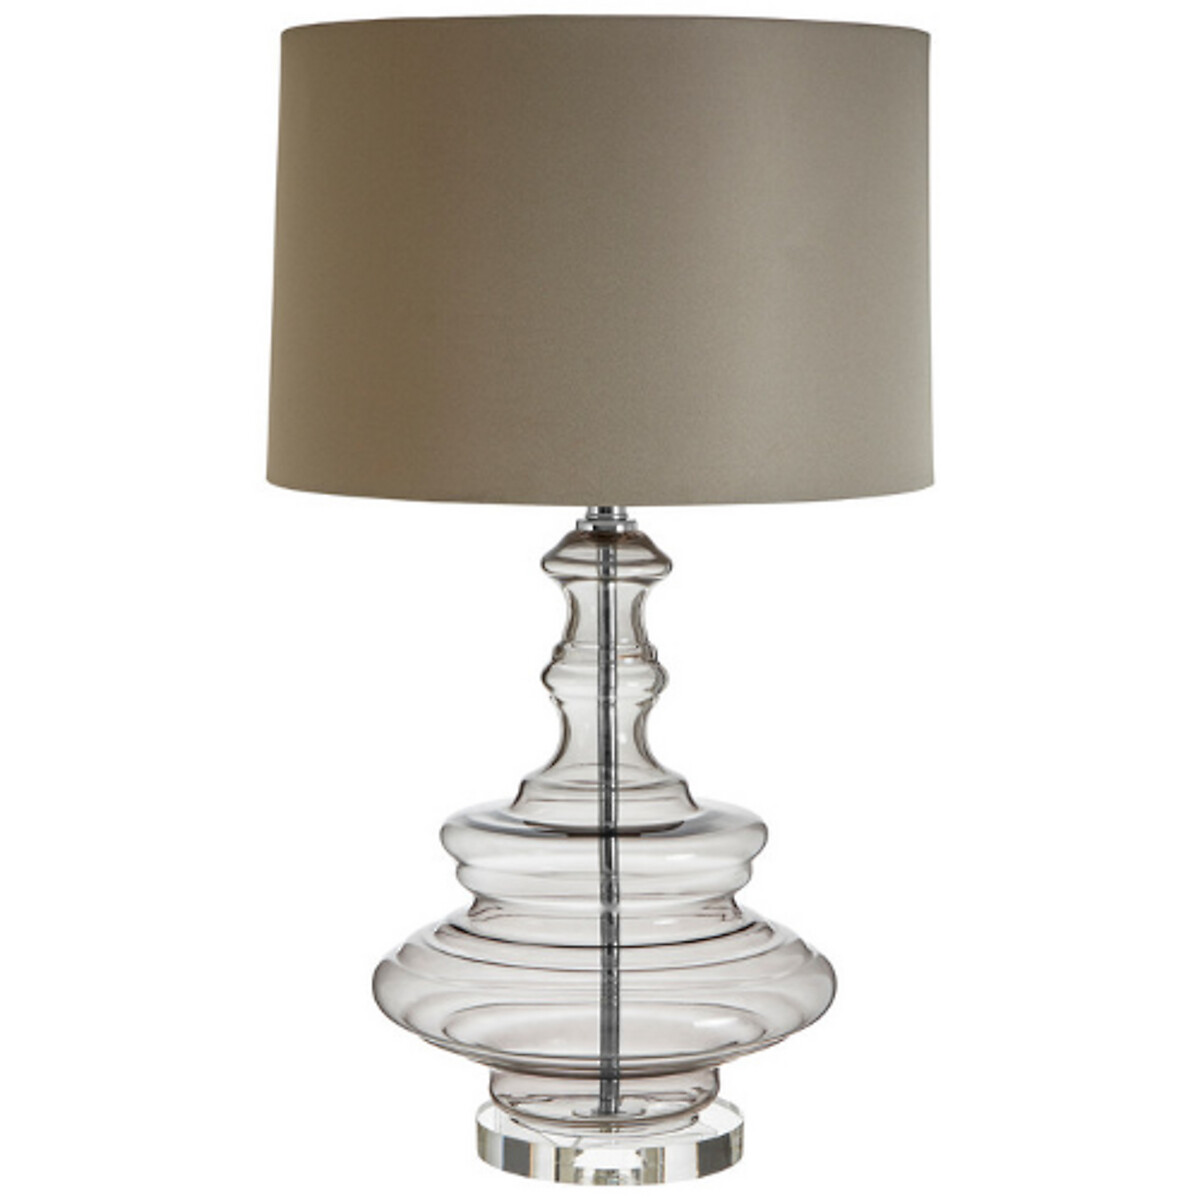 Natural Shade Table Lamp Beige, Round Glass Table Lamp Uk